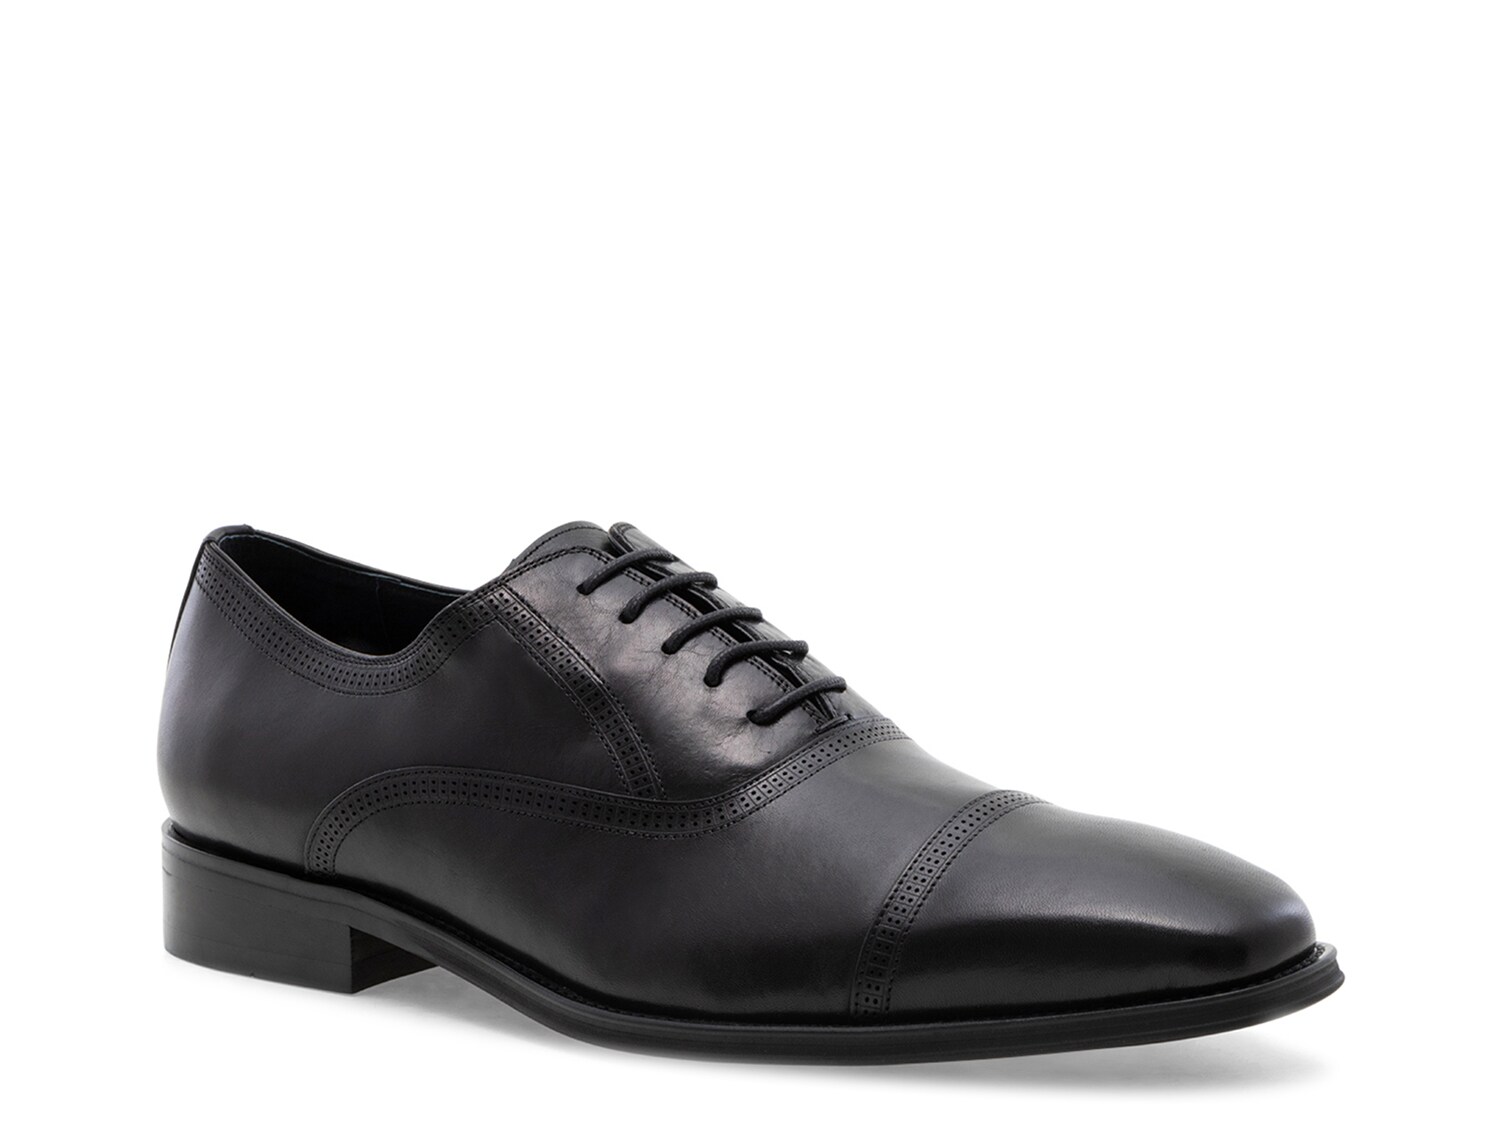 Jump New York McCrae Oxford - Free Shipping | DSW